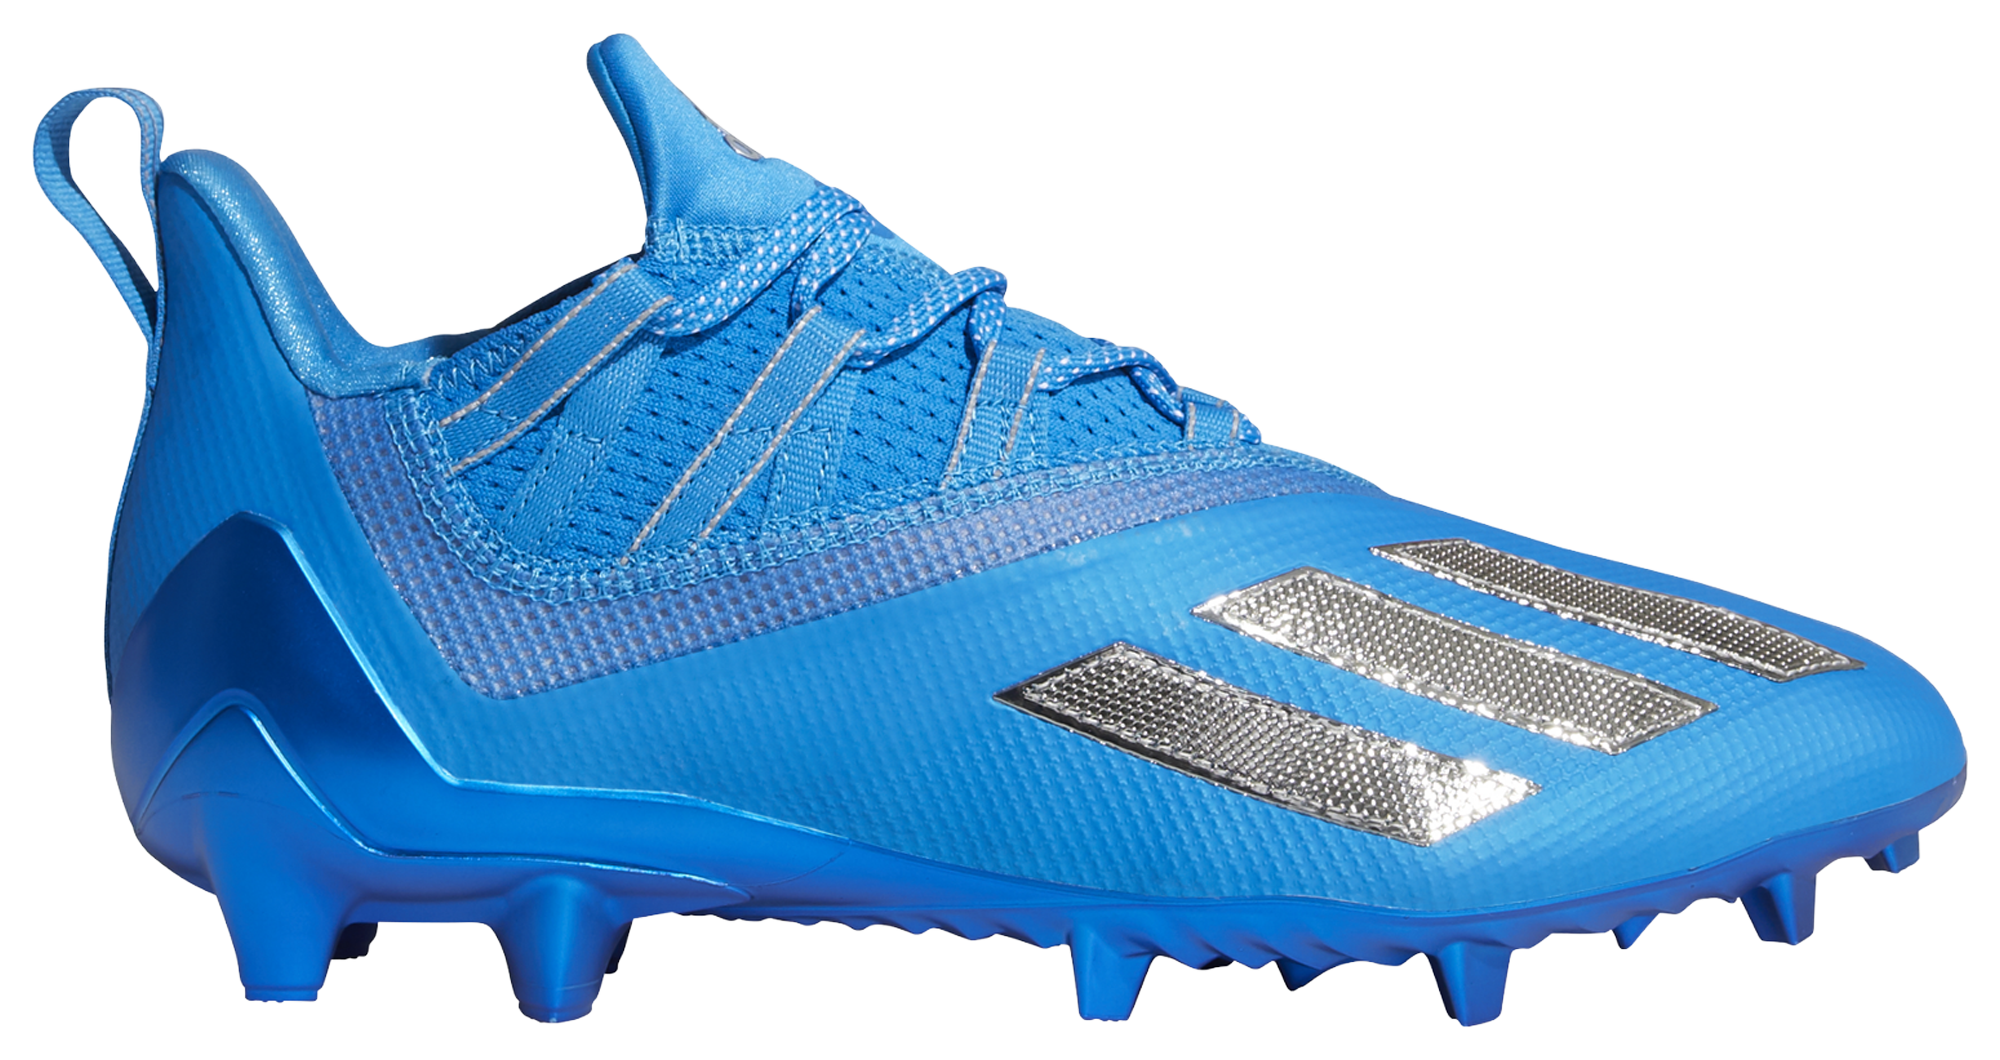 adidas football cleats blue and white